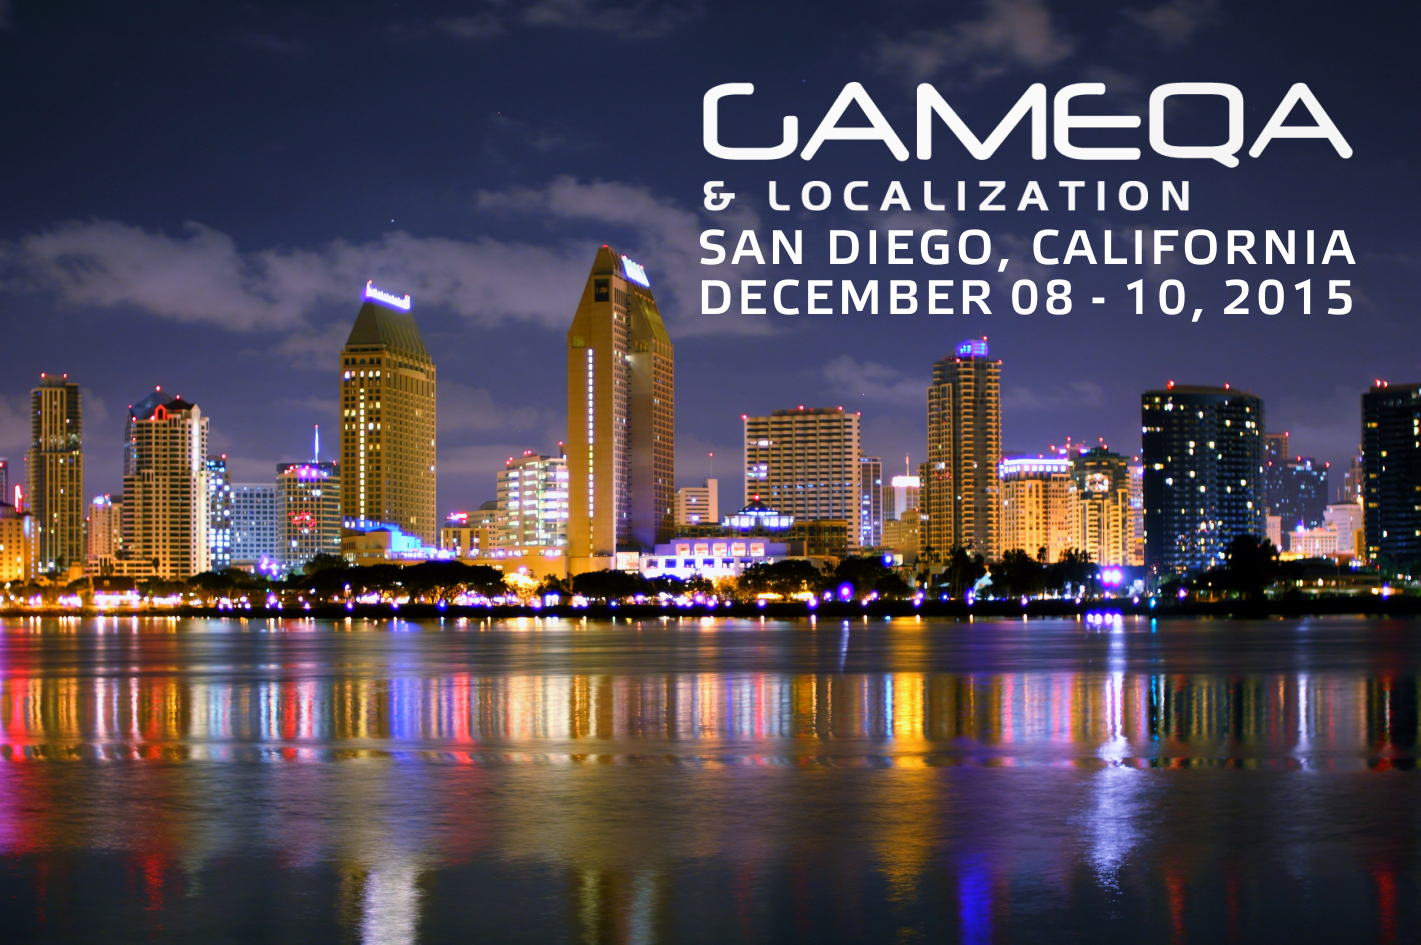 Attending the San Diego Game QA & Localization conference